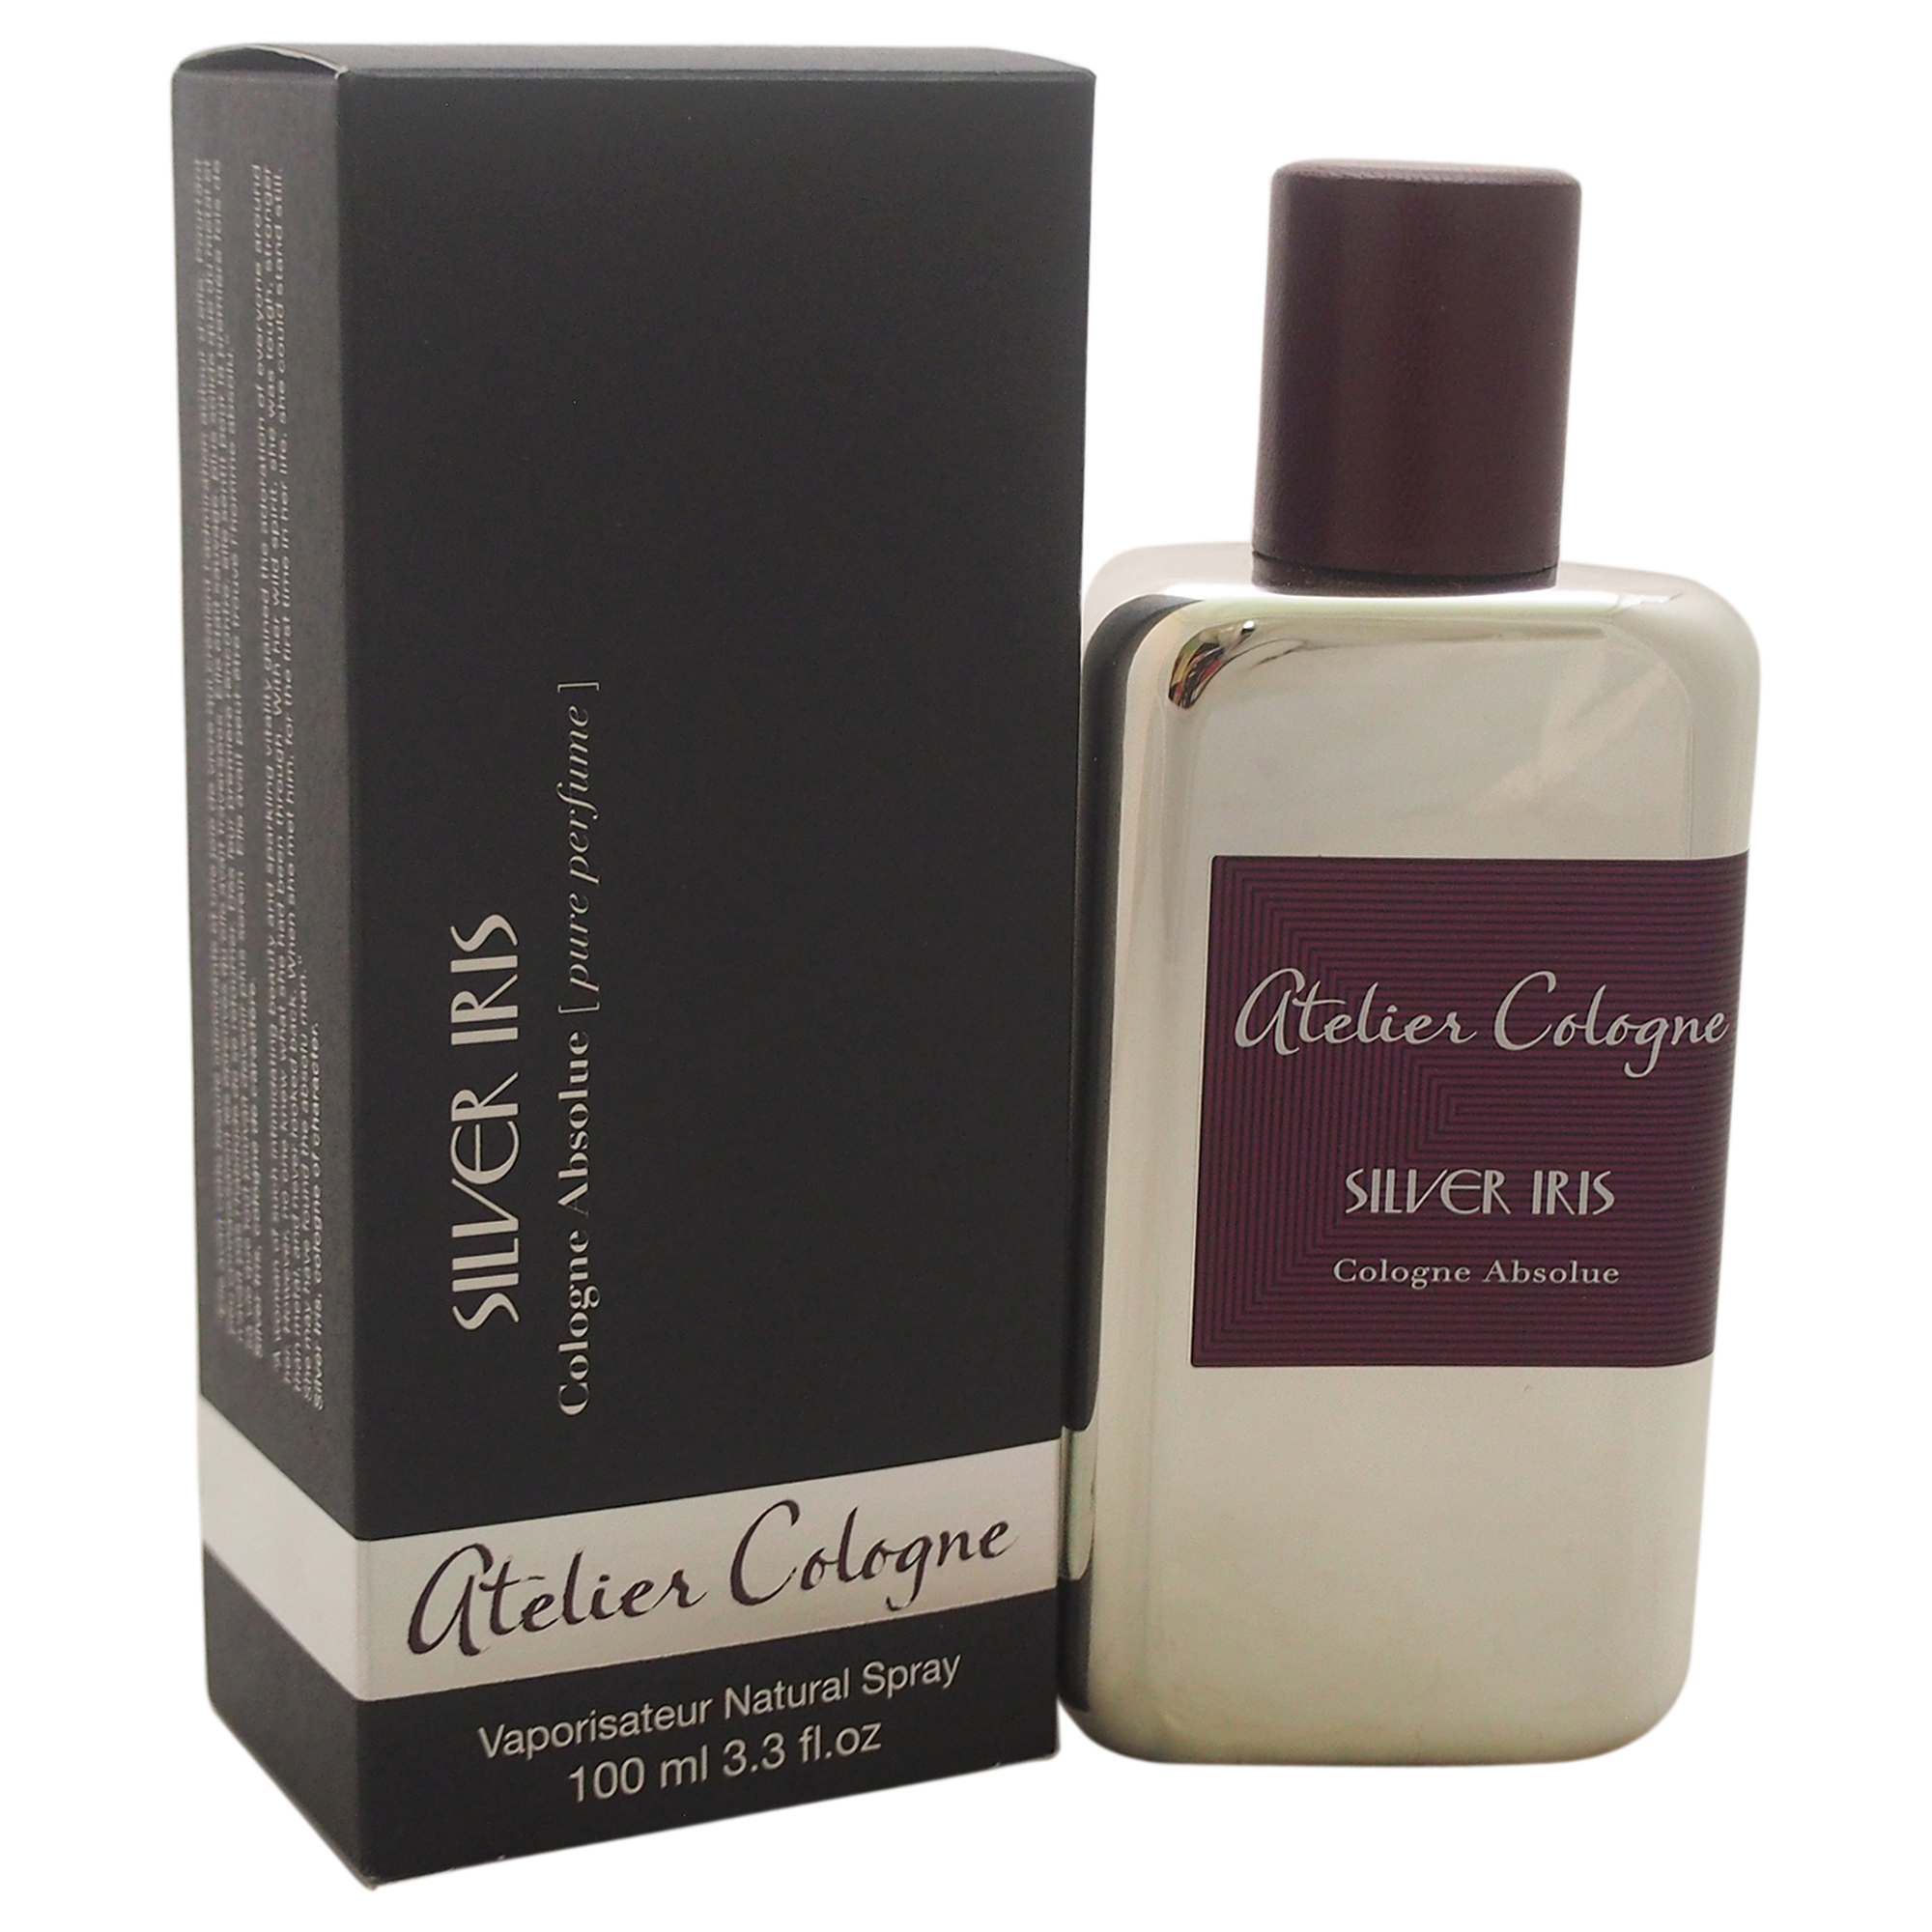 Silver Iris by Atelier Cologne for Unisex - 3.3 oz Cologne Absolue Spray